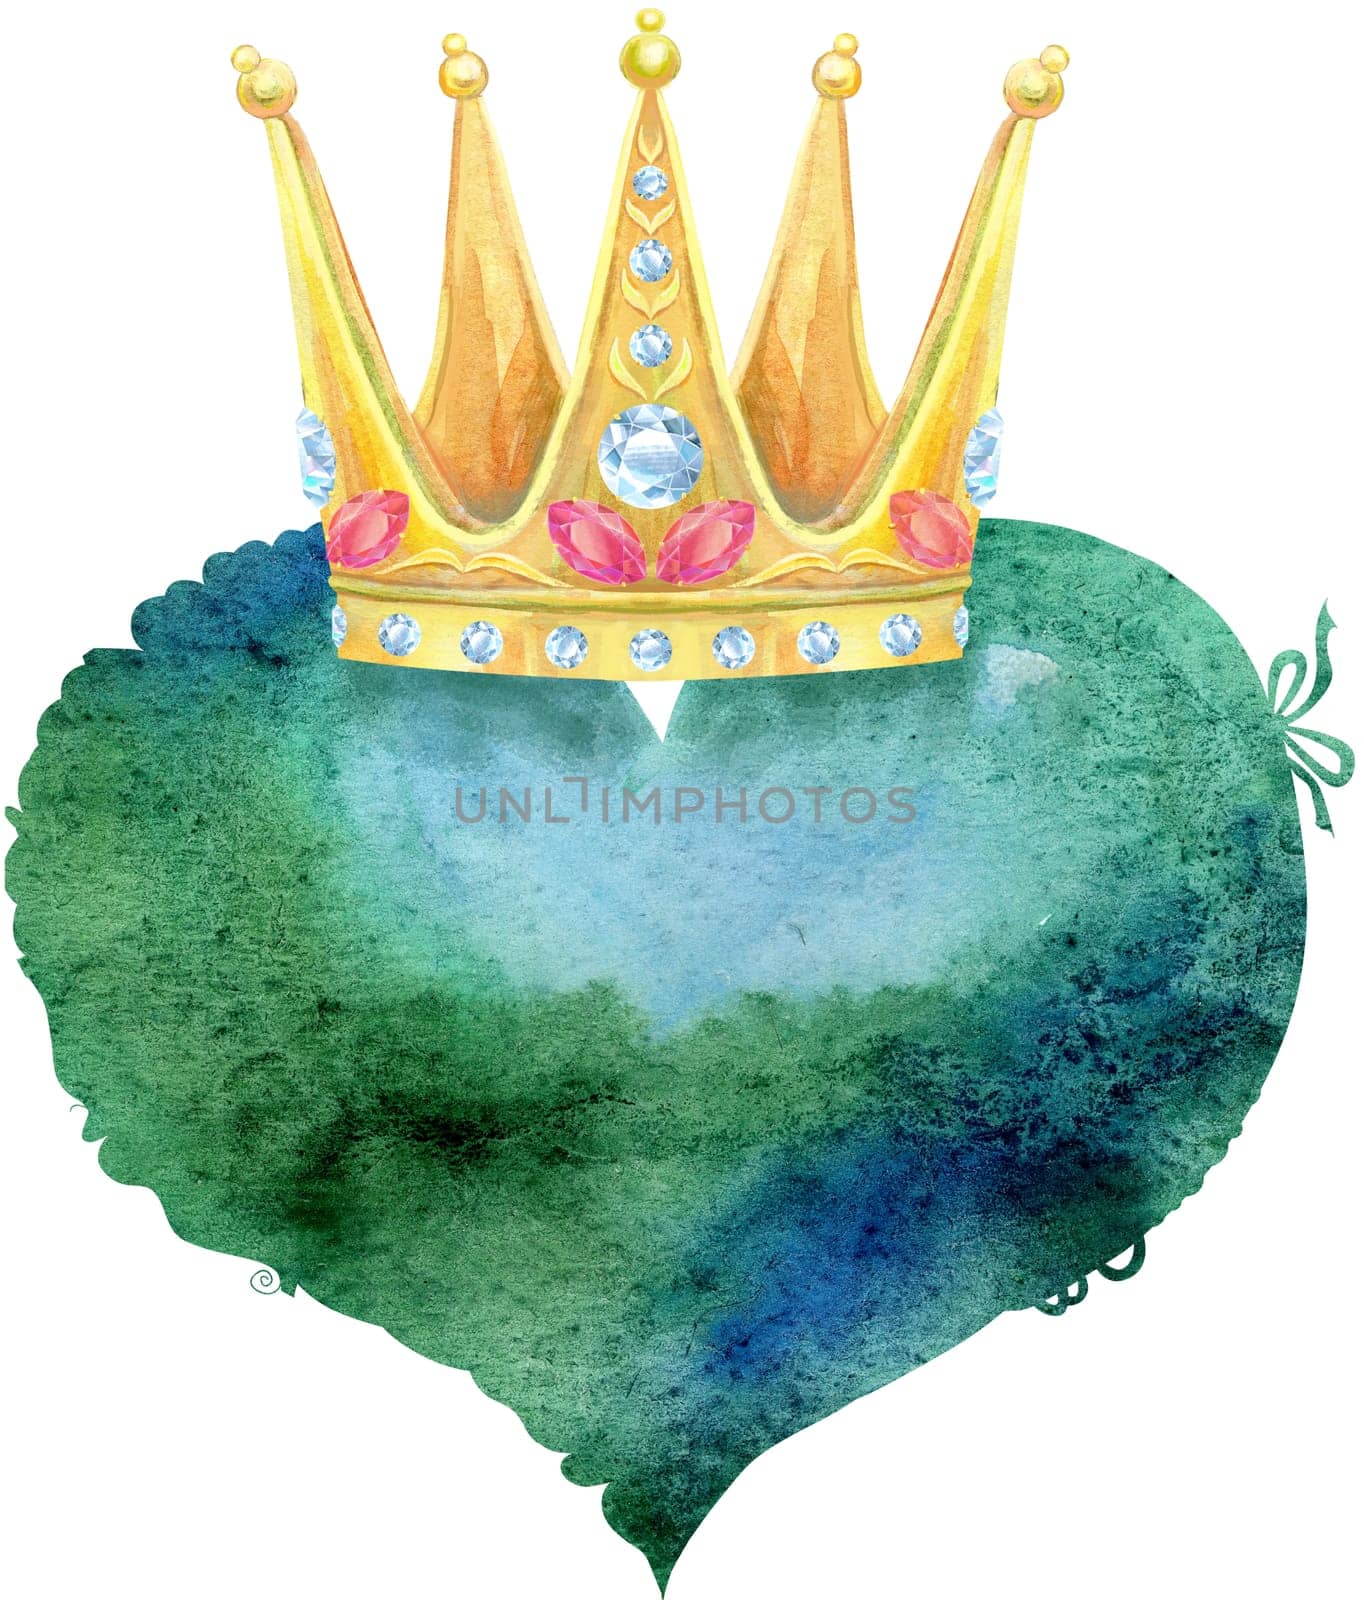 Watercolor dark green heart with golden crown, painted by hand